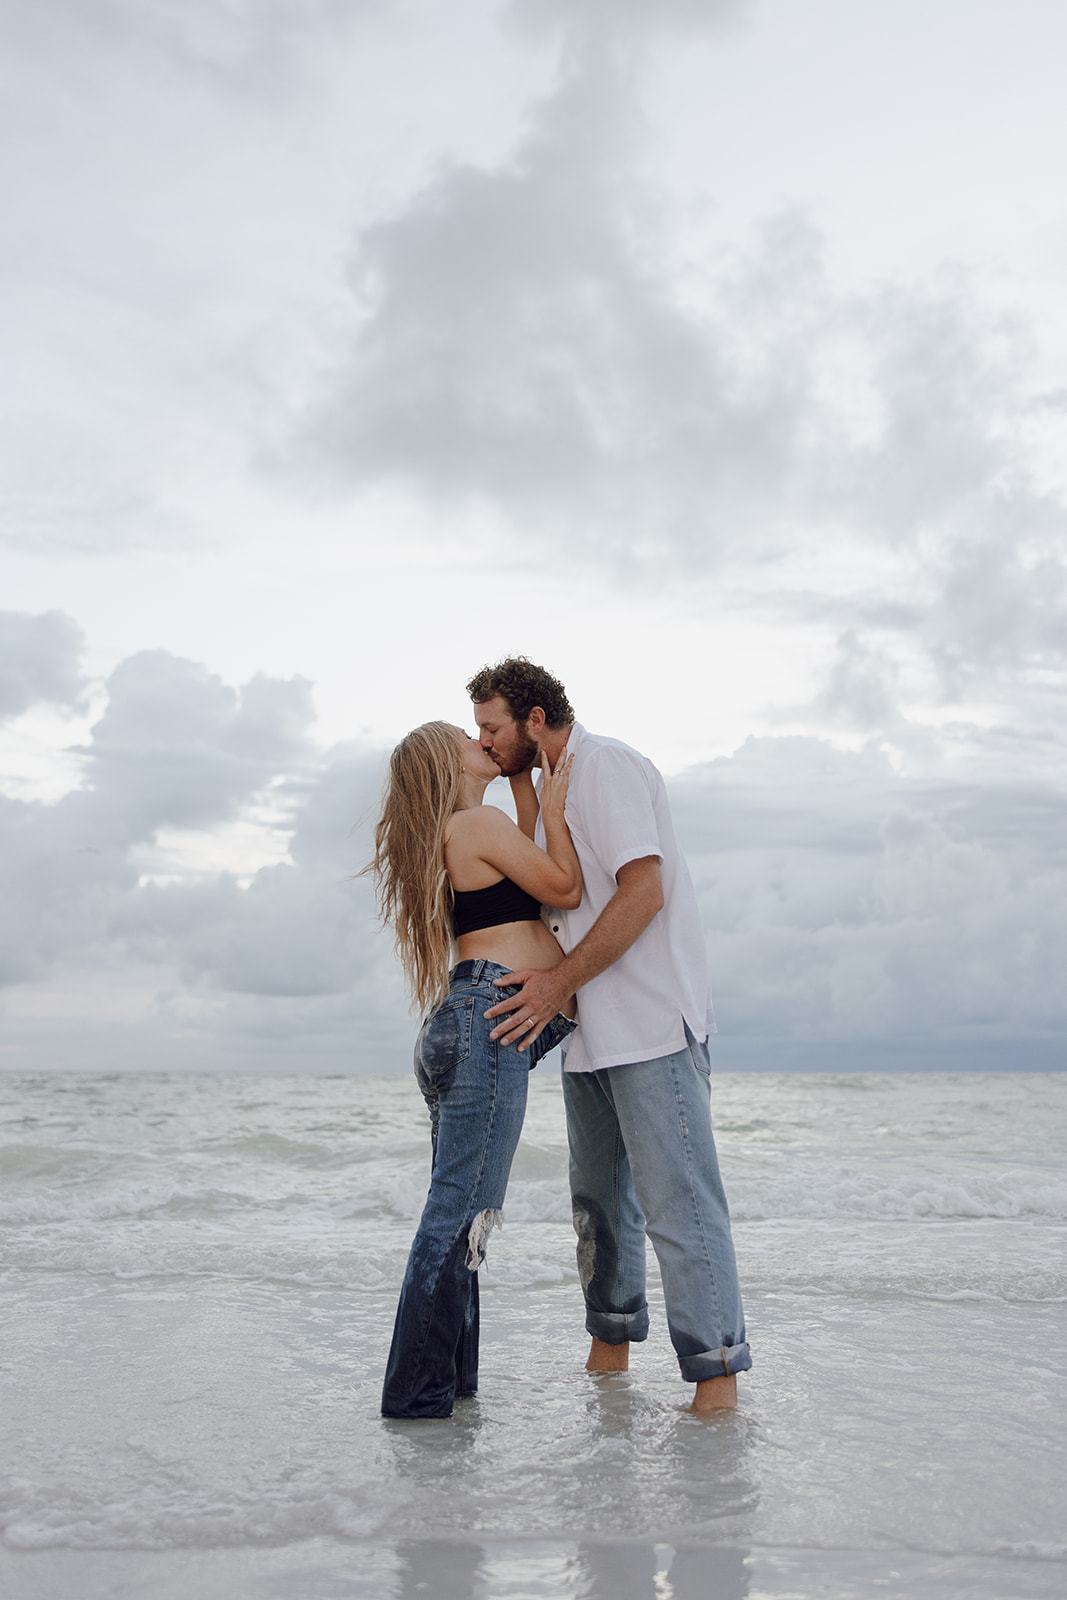 the couple kissing in the water with the storm clouds overhead